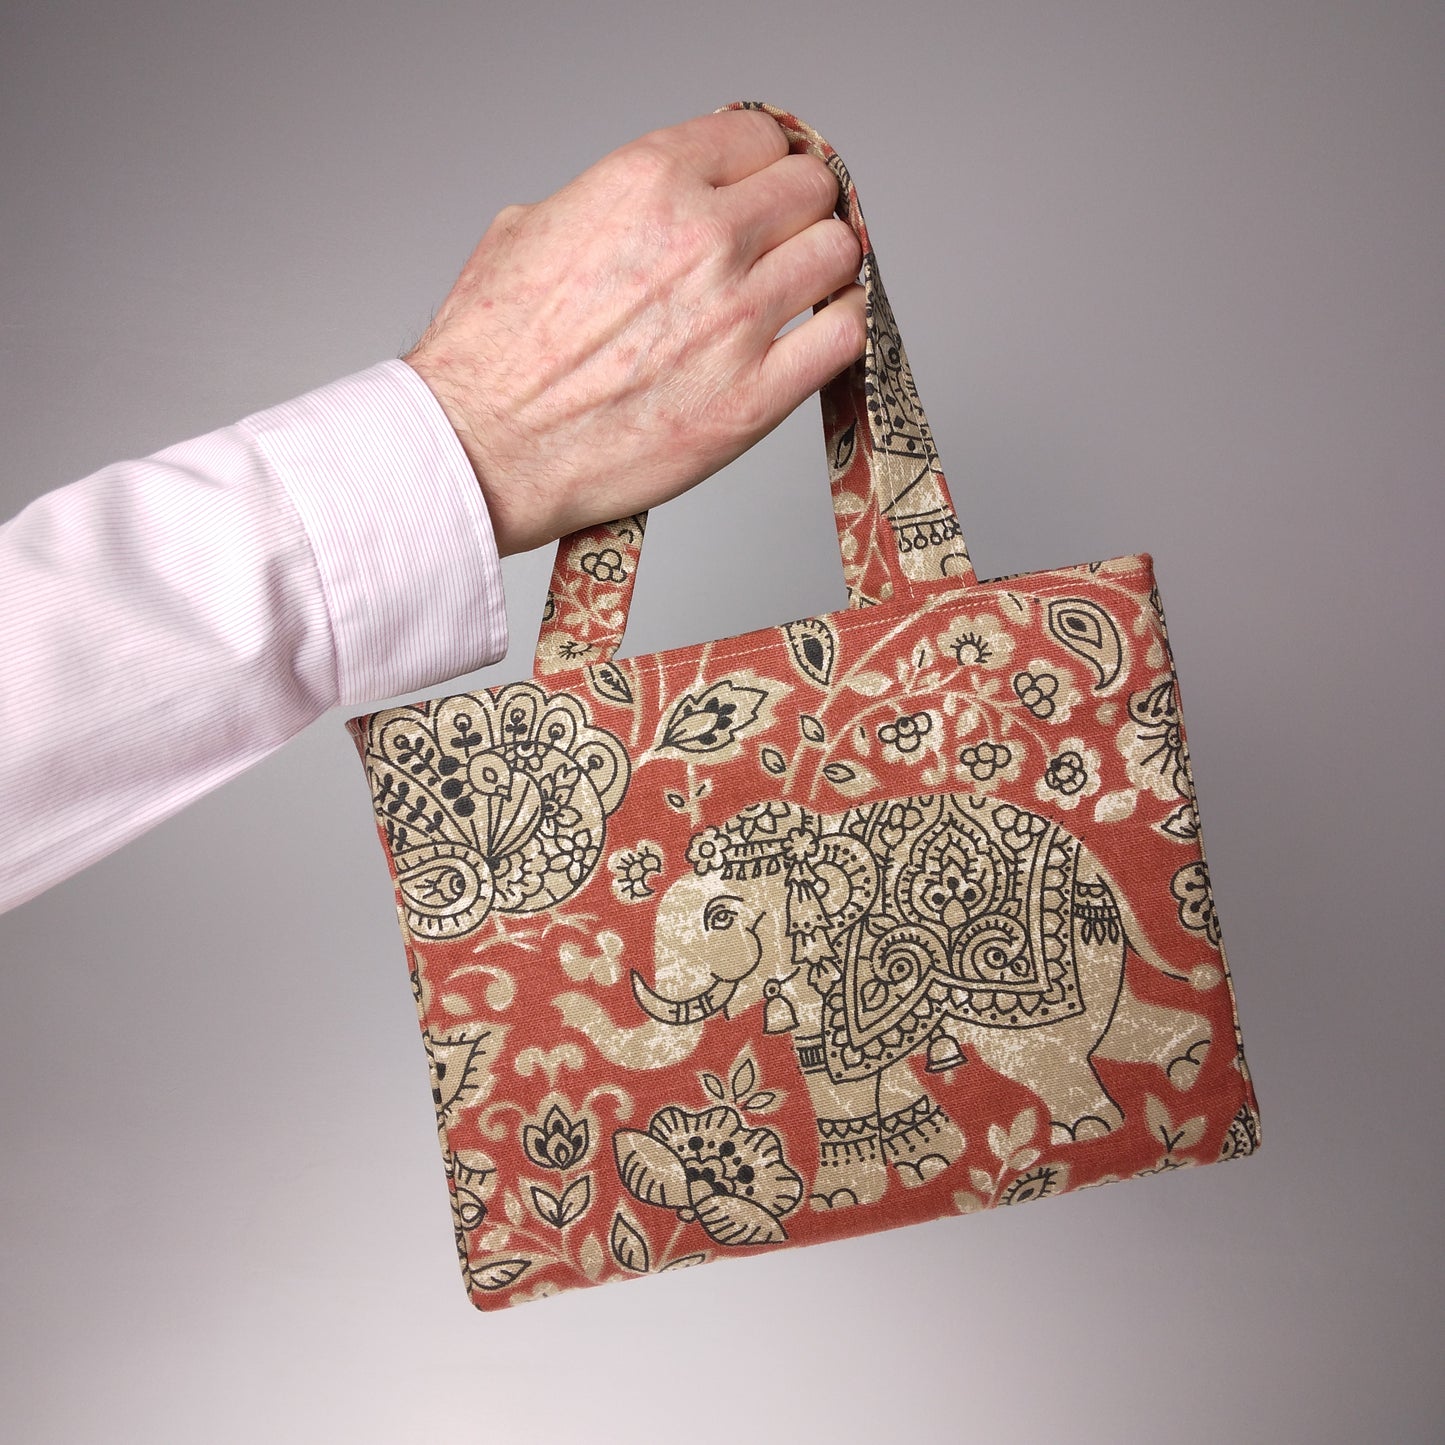 Mini tote bag with ornate taupe elephant design on red background